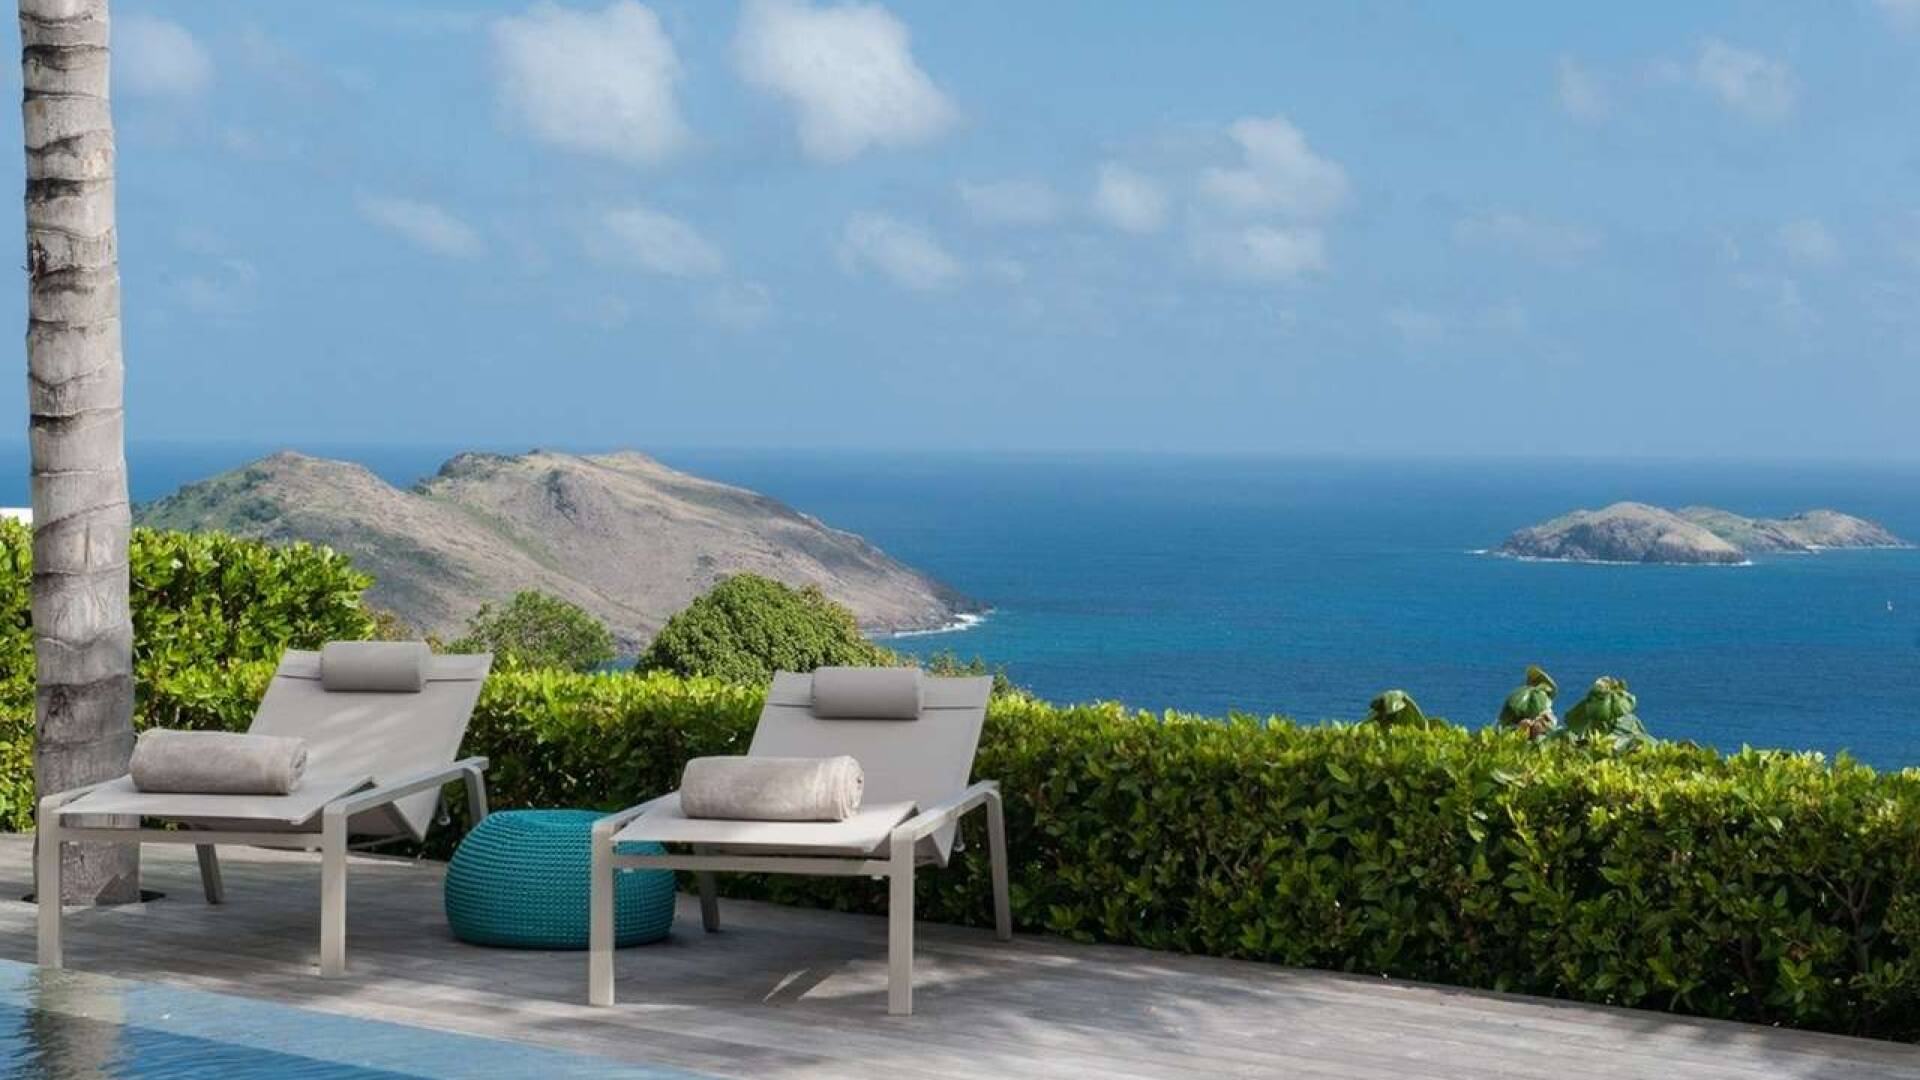 The view from WV LNA, Colombier, St. Barthelemy